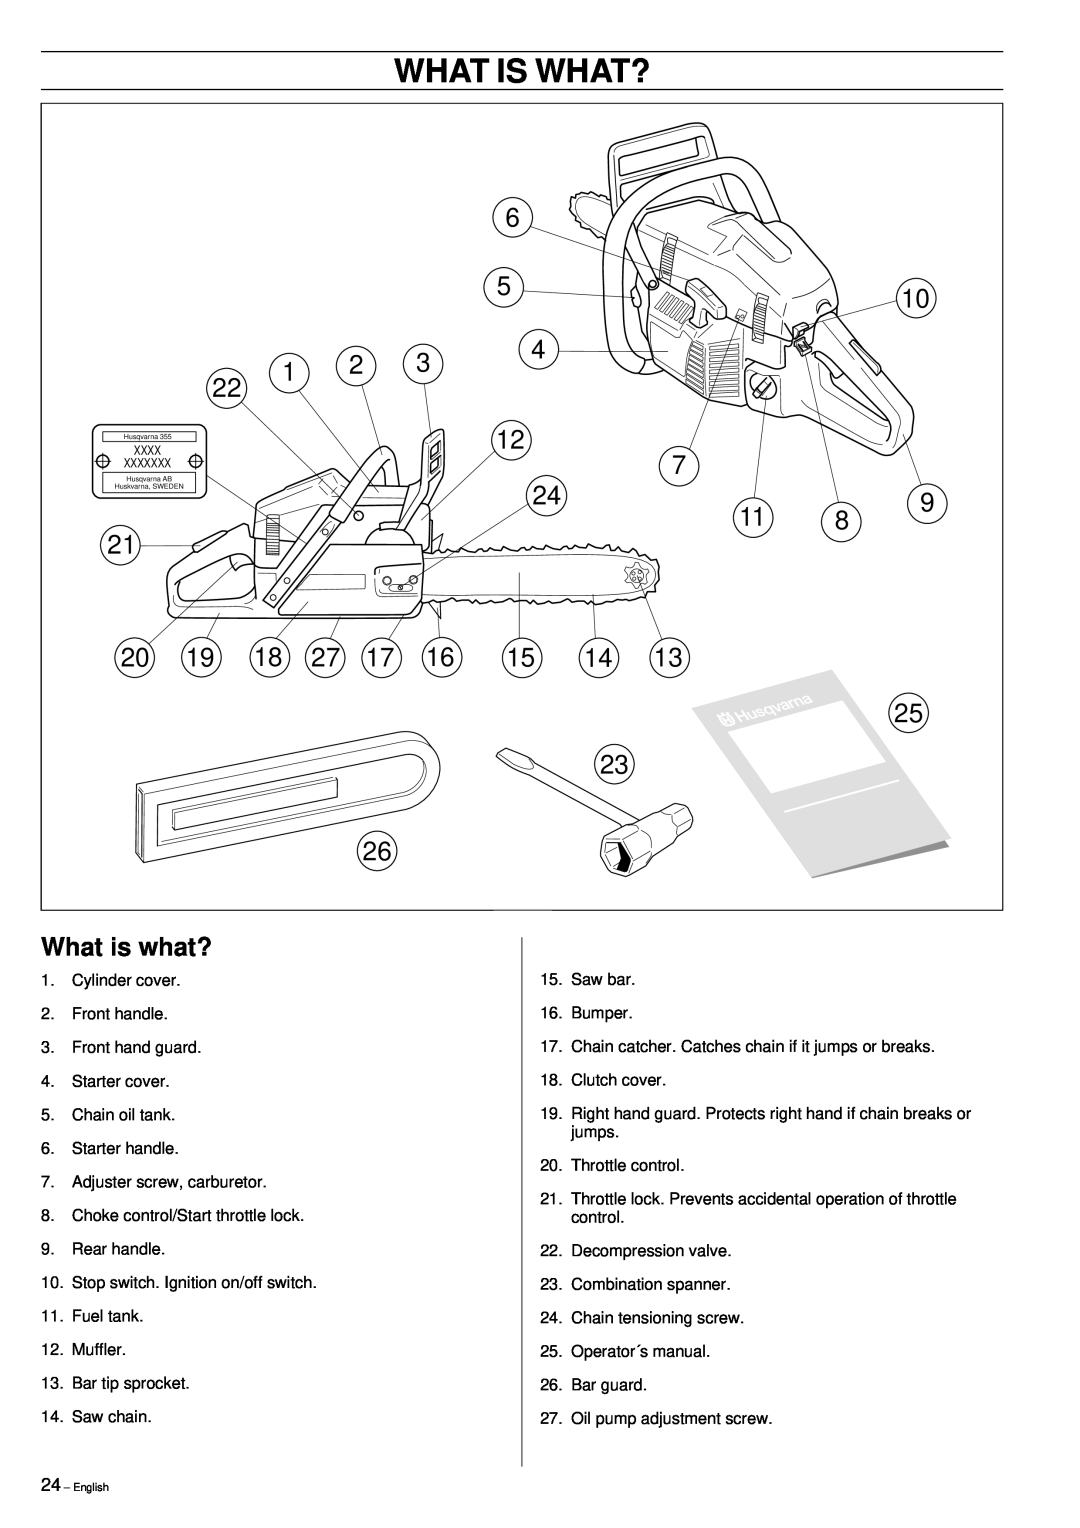 Husqvarna 355 manual What Is What?, What is what? 